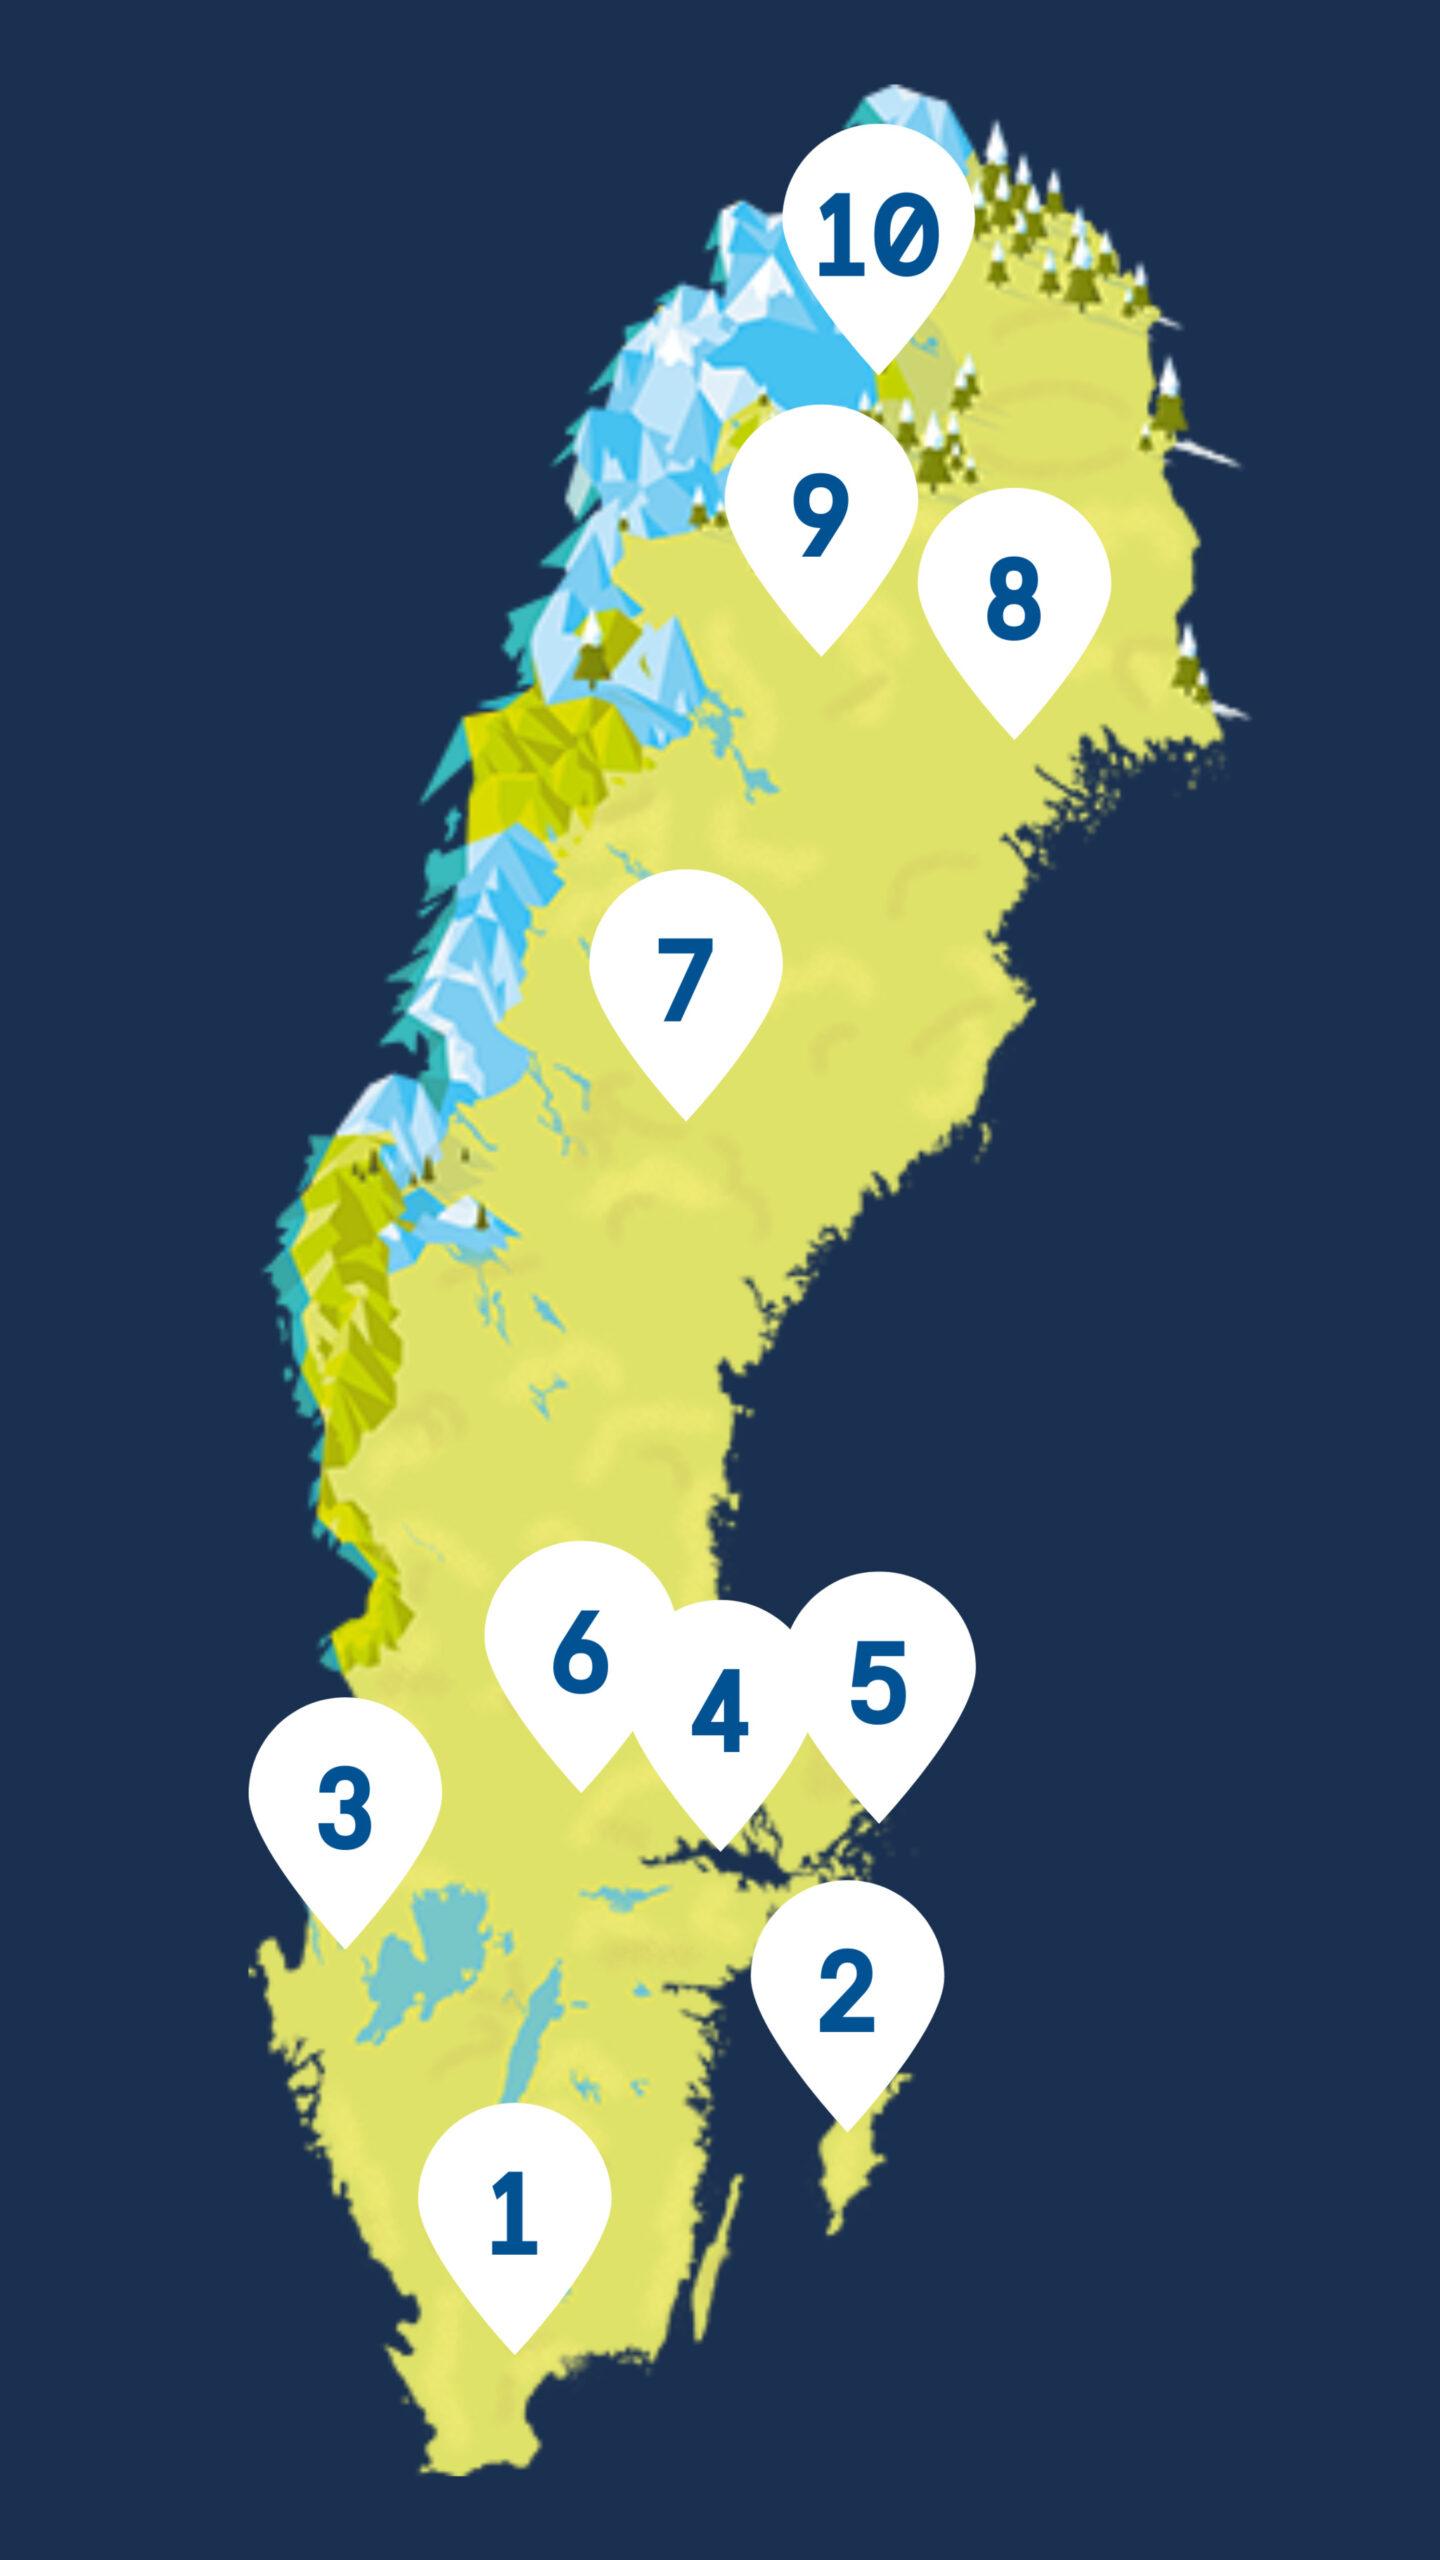 Map of Sweden against a dark blue background, and with numbers dotted over the country.